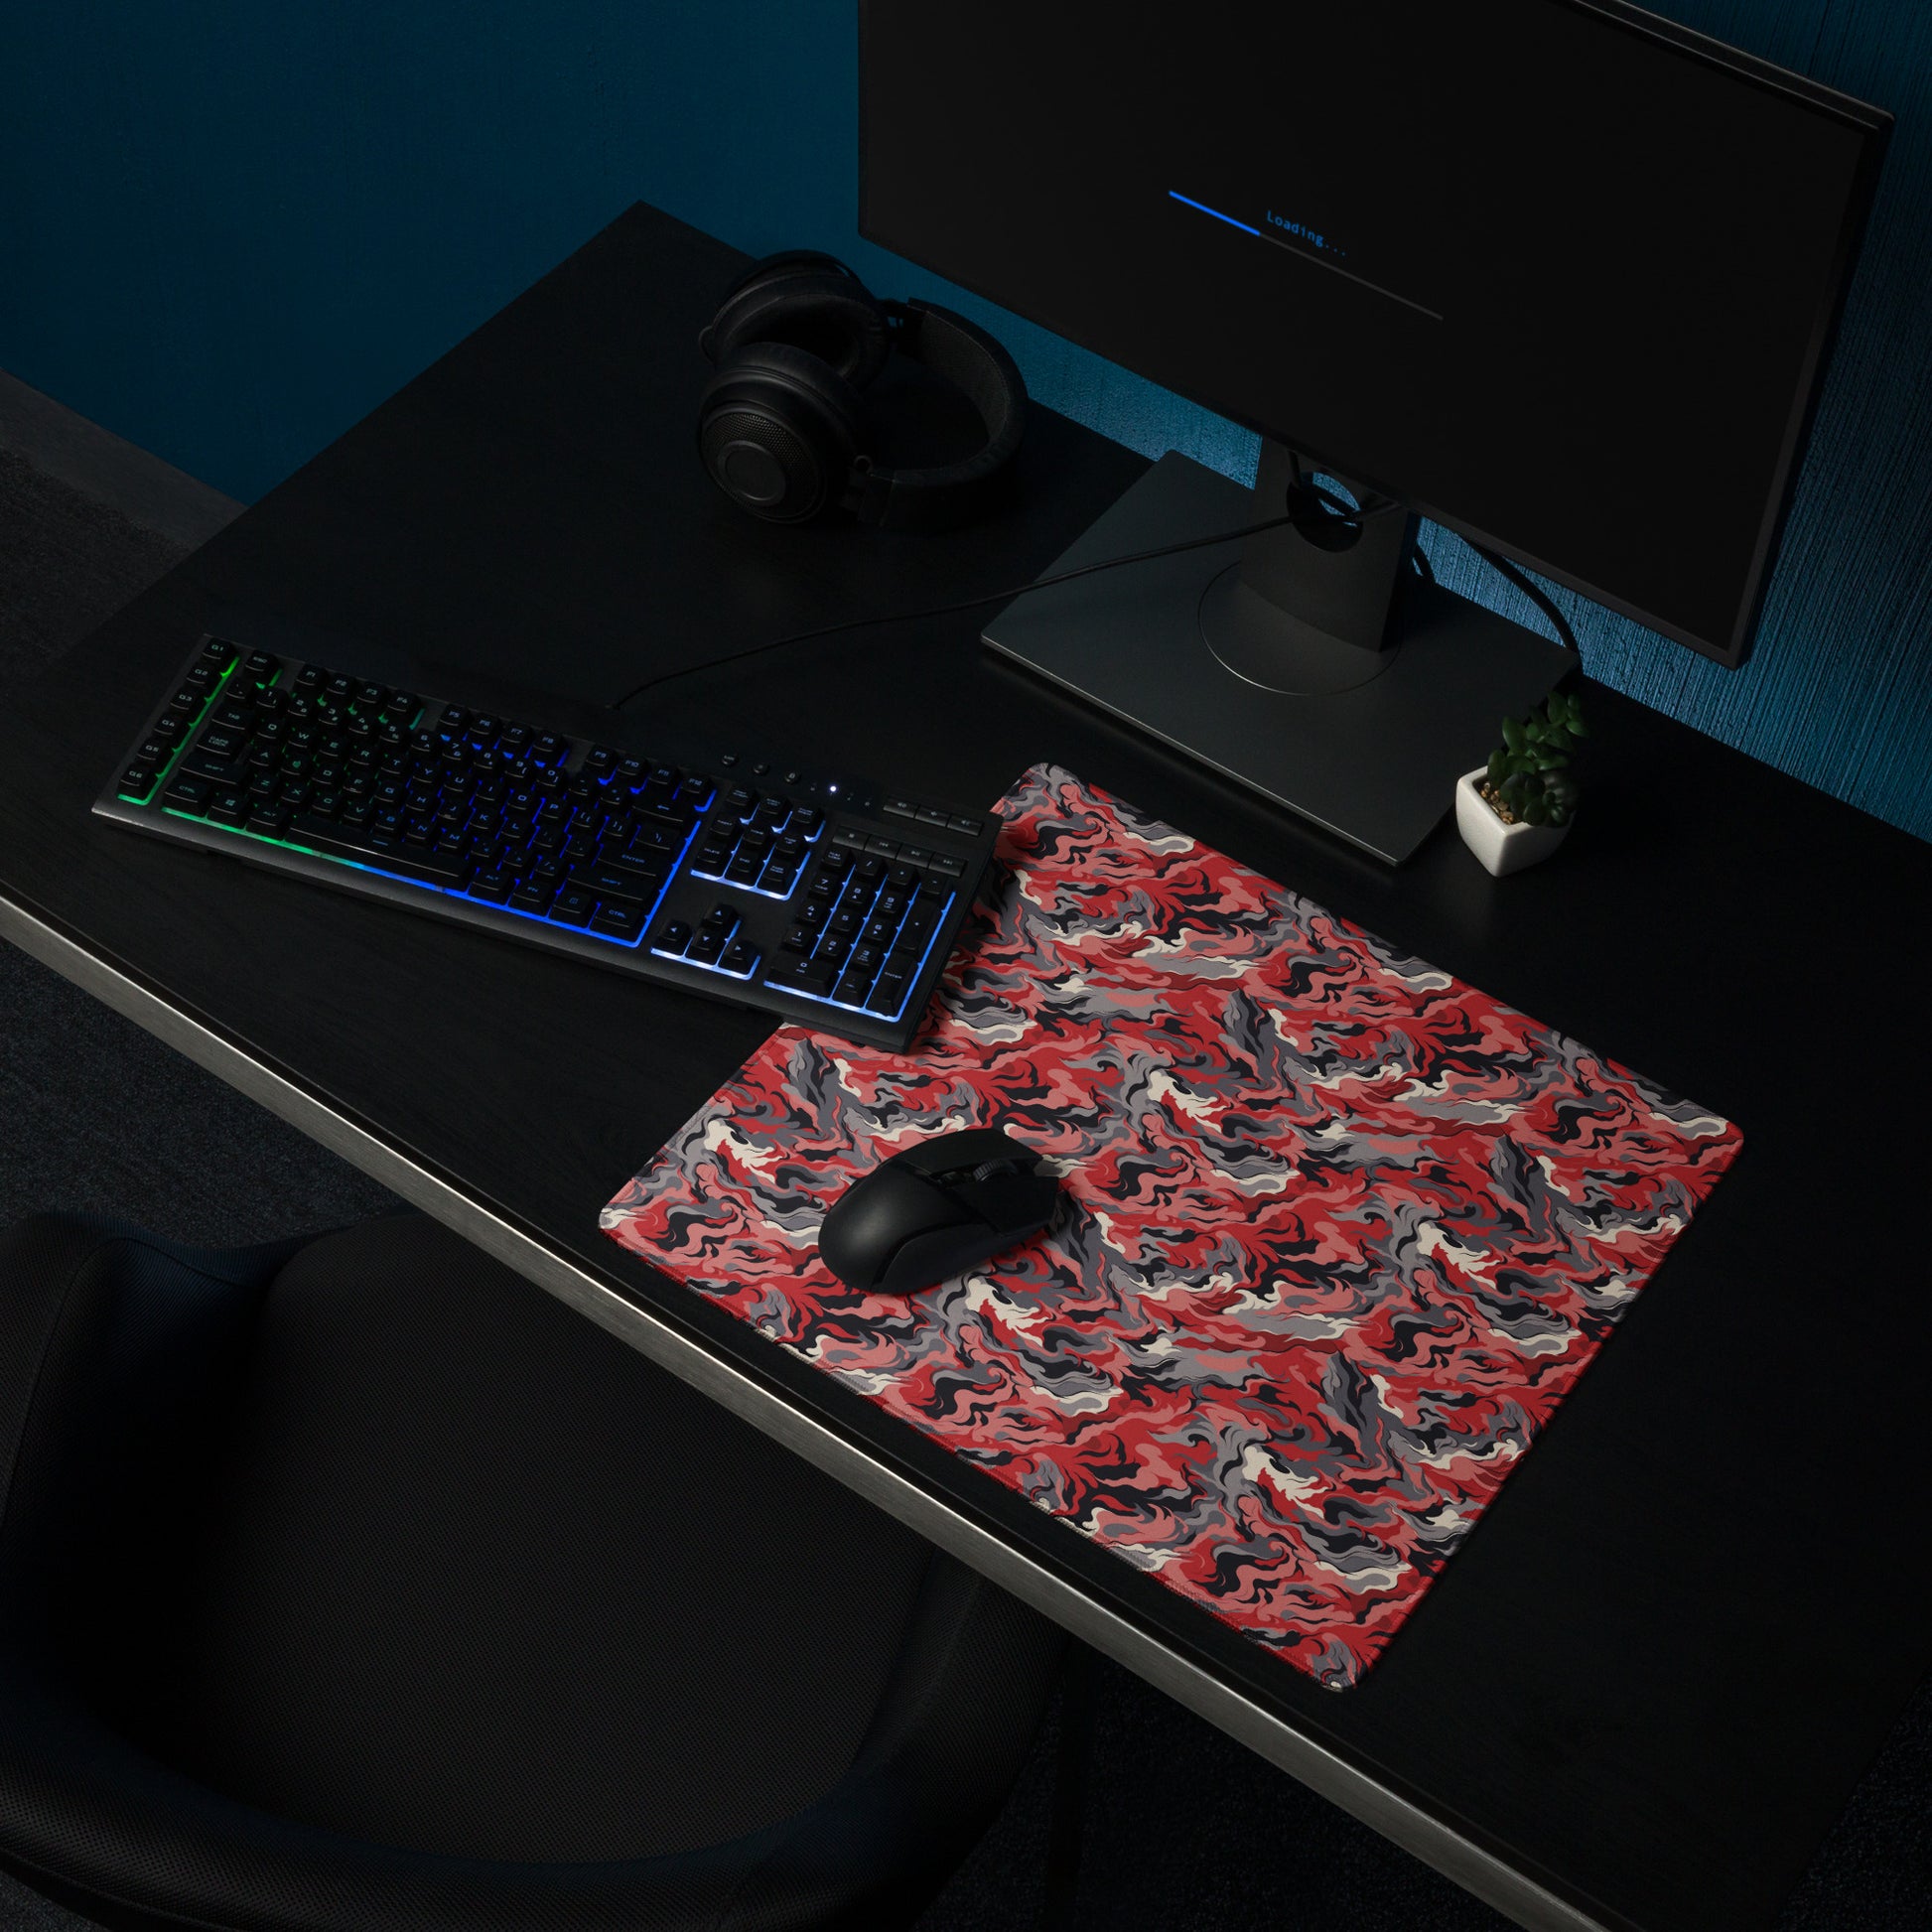 A 18" x 16" desk pad with a grey and red camo pattern sitting on a desk.